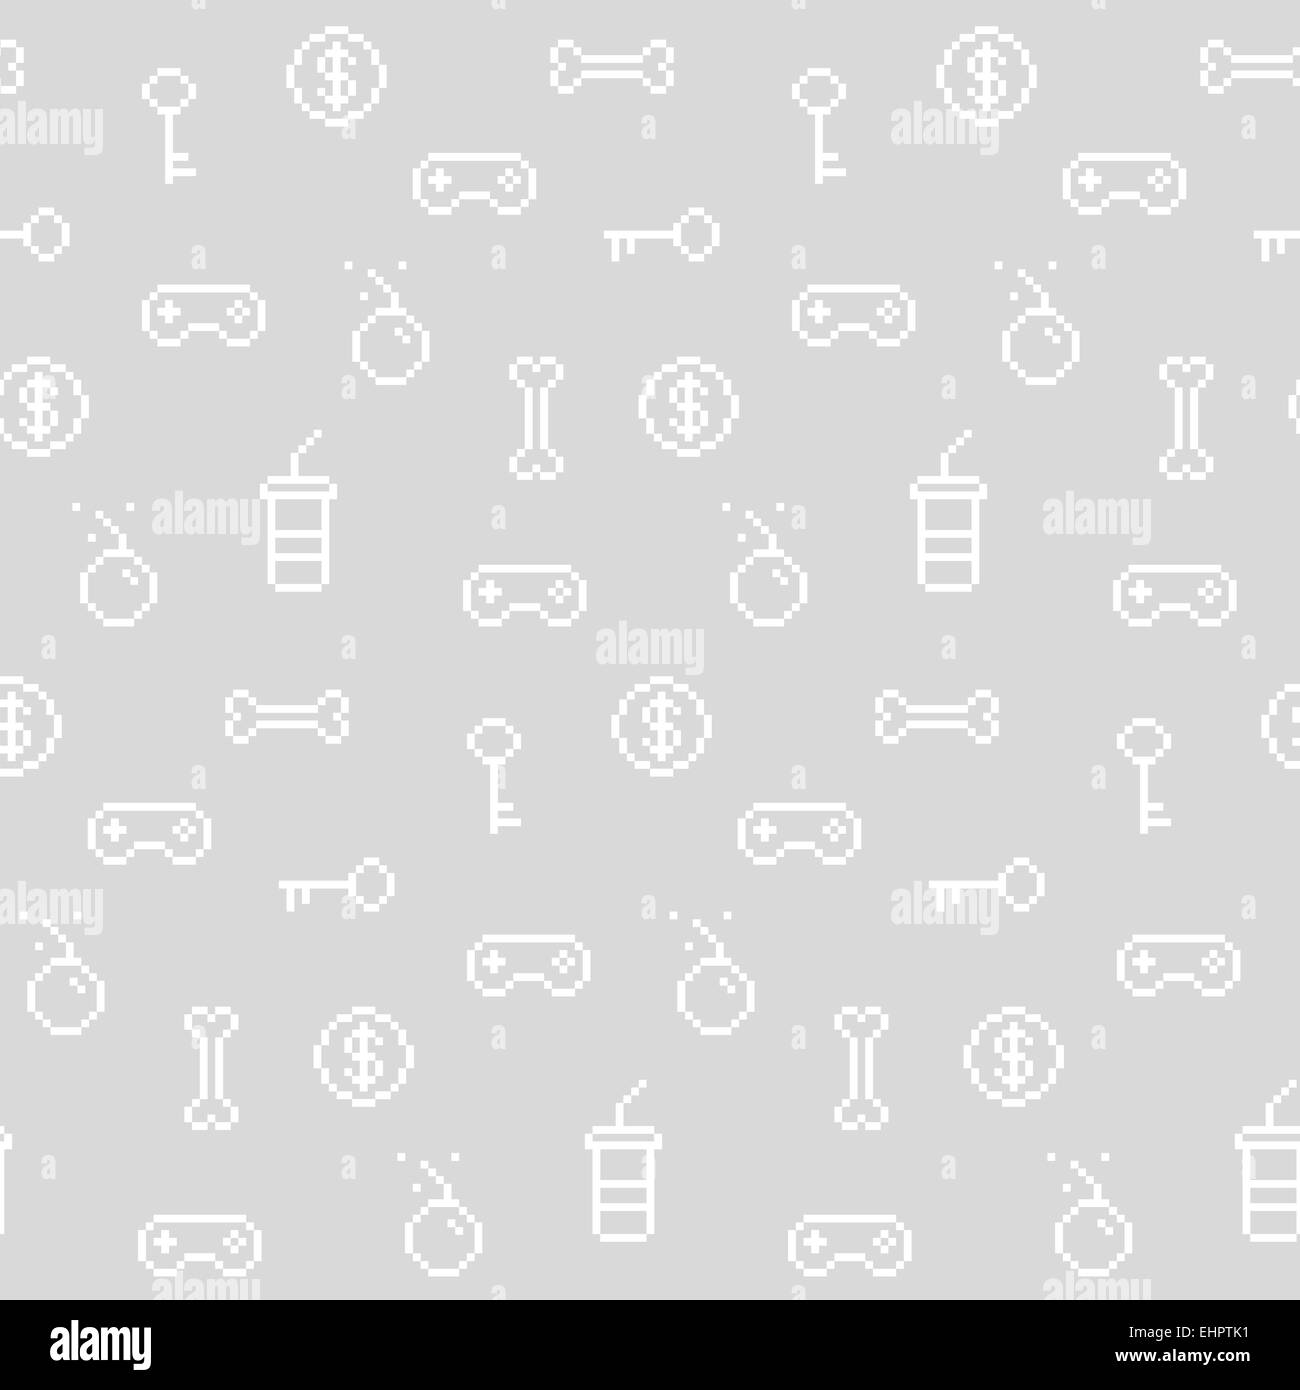 Seamless old school gaming inspired pattern, game icons, achievements, 90s background Stock Photo